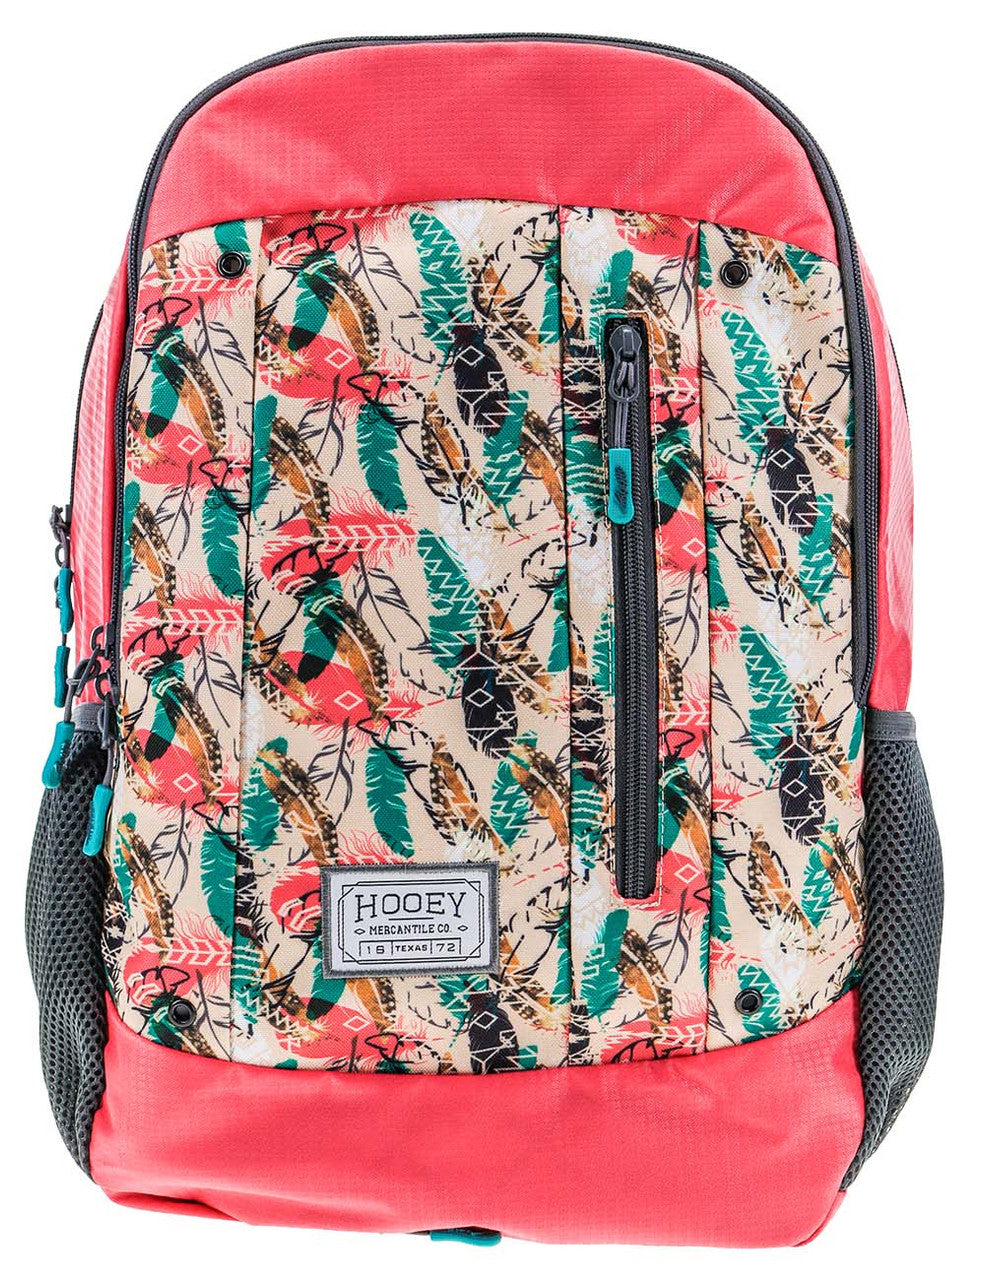 "Rockstar" Cream/Rose/Turquoise Feather Aztec Pattern with Rose/Black Accents Backpack